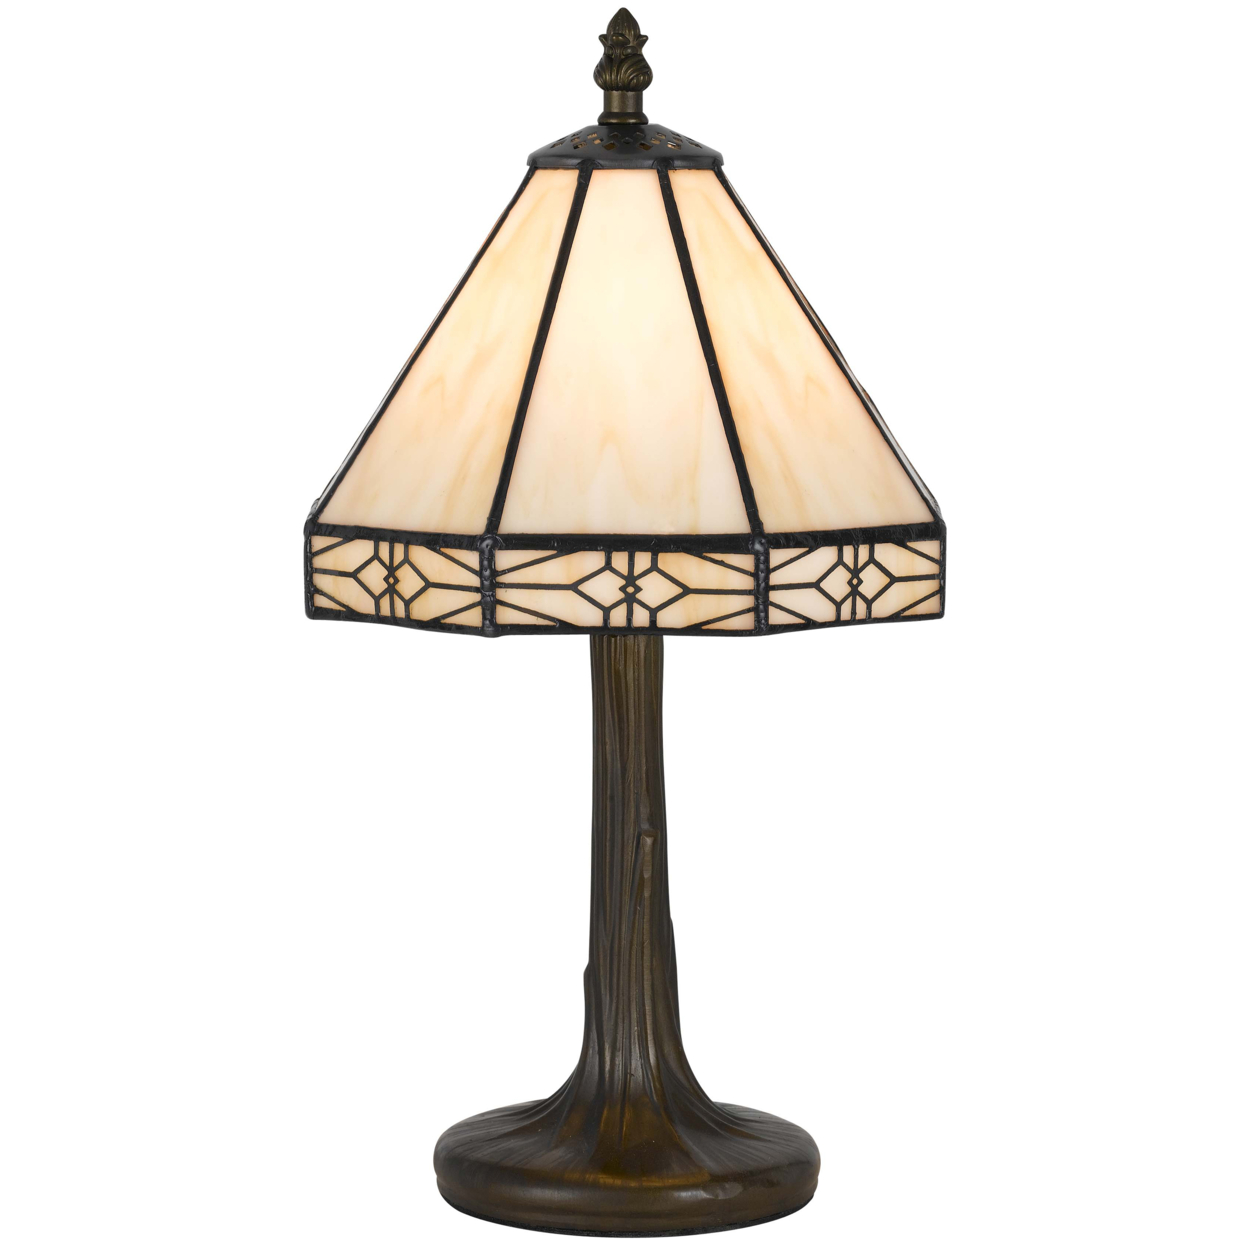 Tree Like Metal Body Tiffany Table Lamp With Conical Shade,Beige And Bronze- Saltoro Sherpi